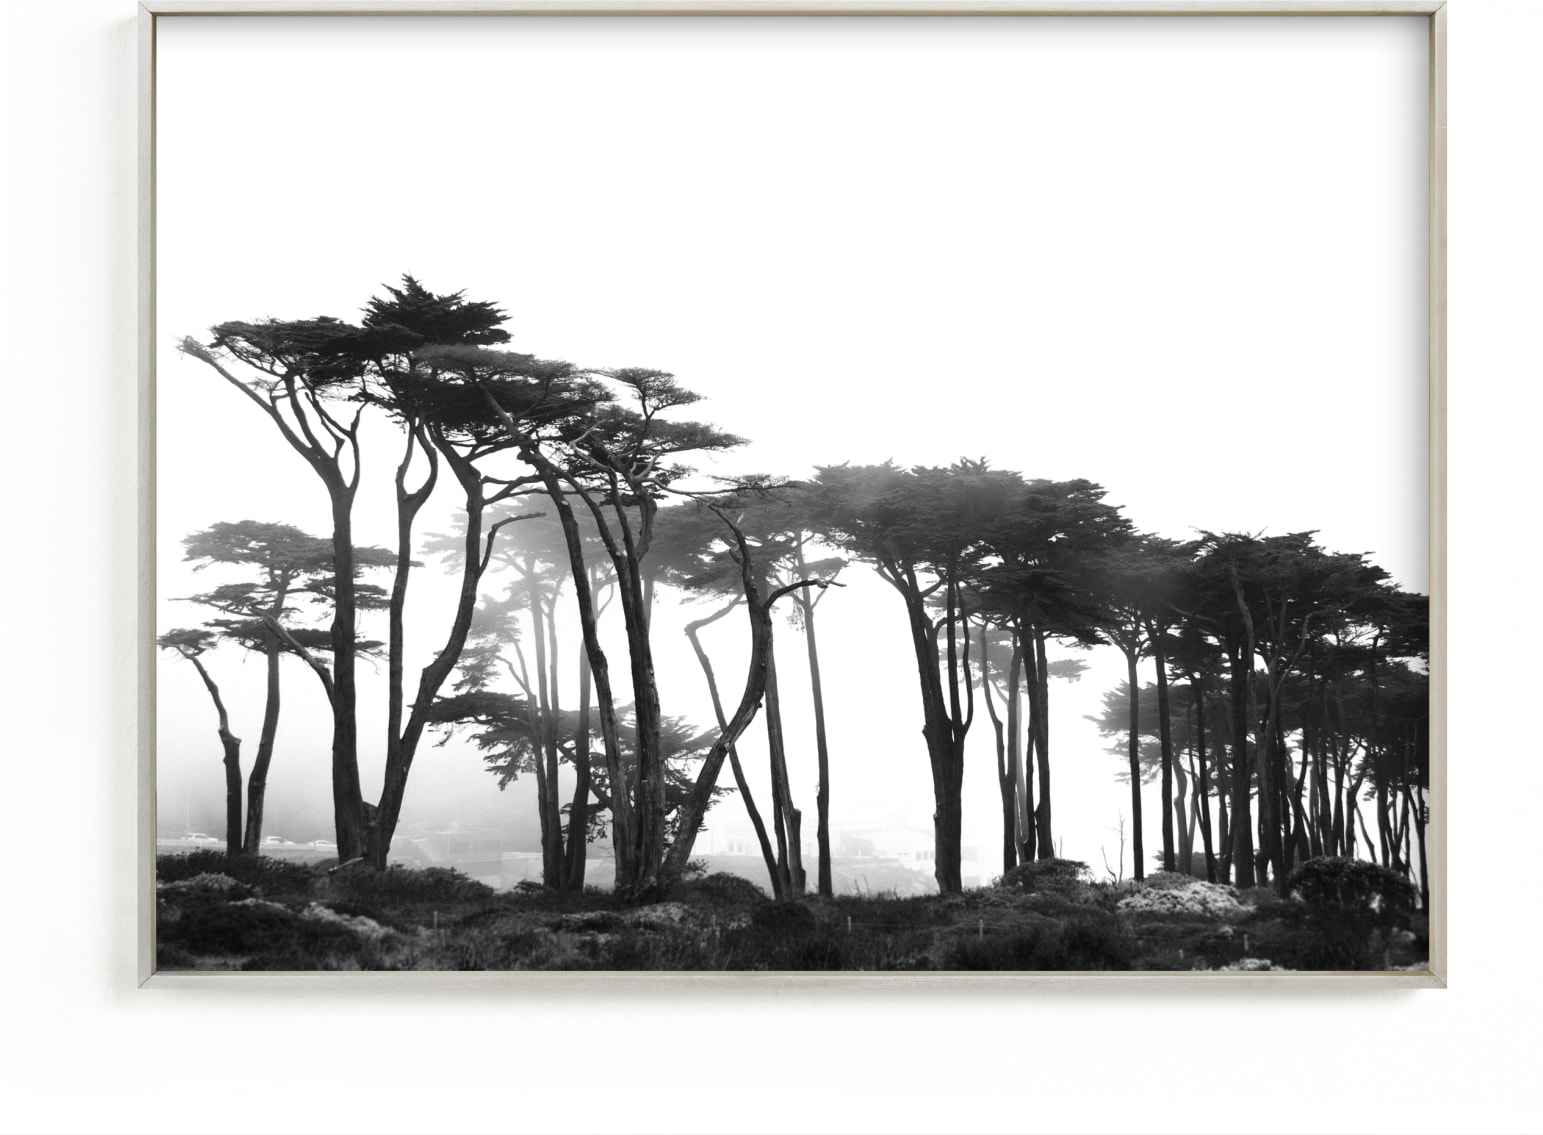 This is a black and white art by Tania Medeiros called Lands End.